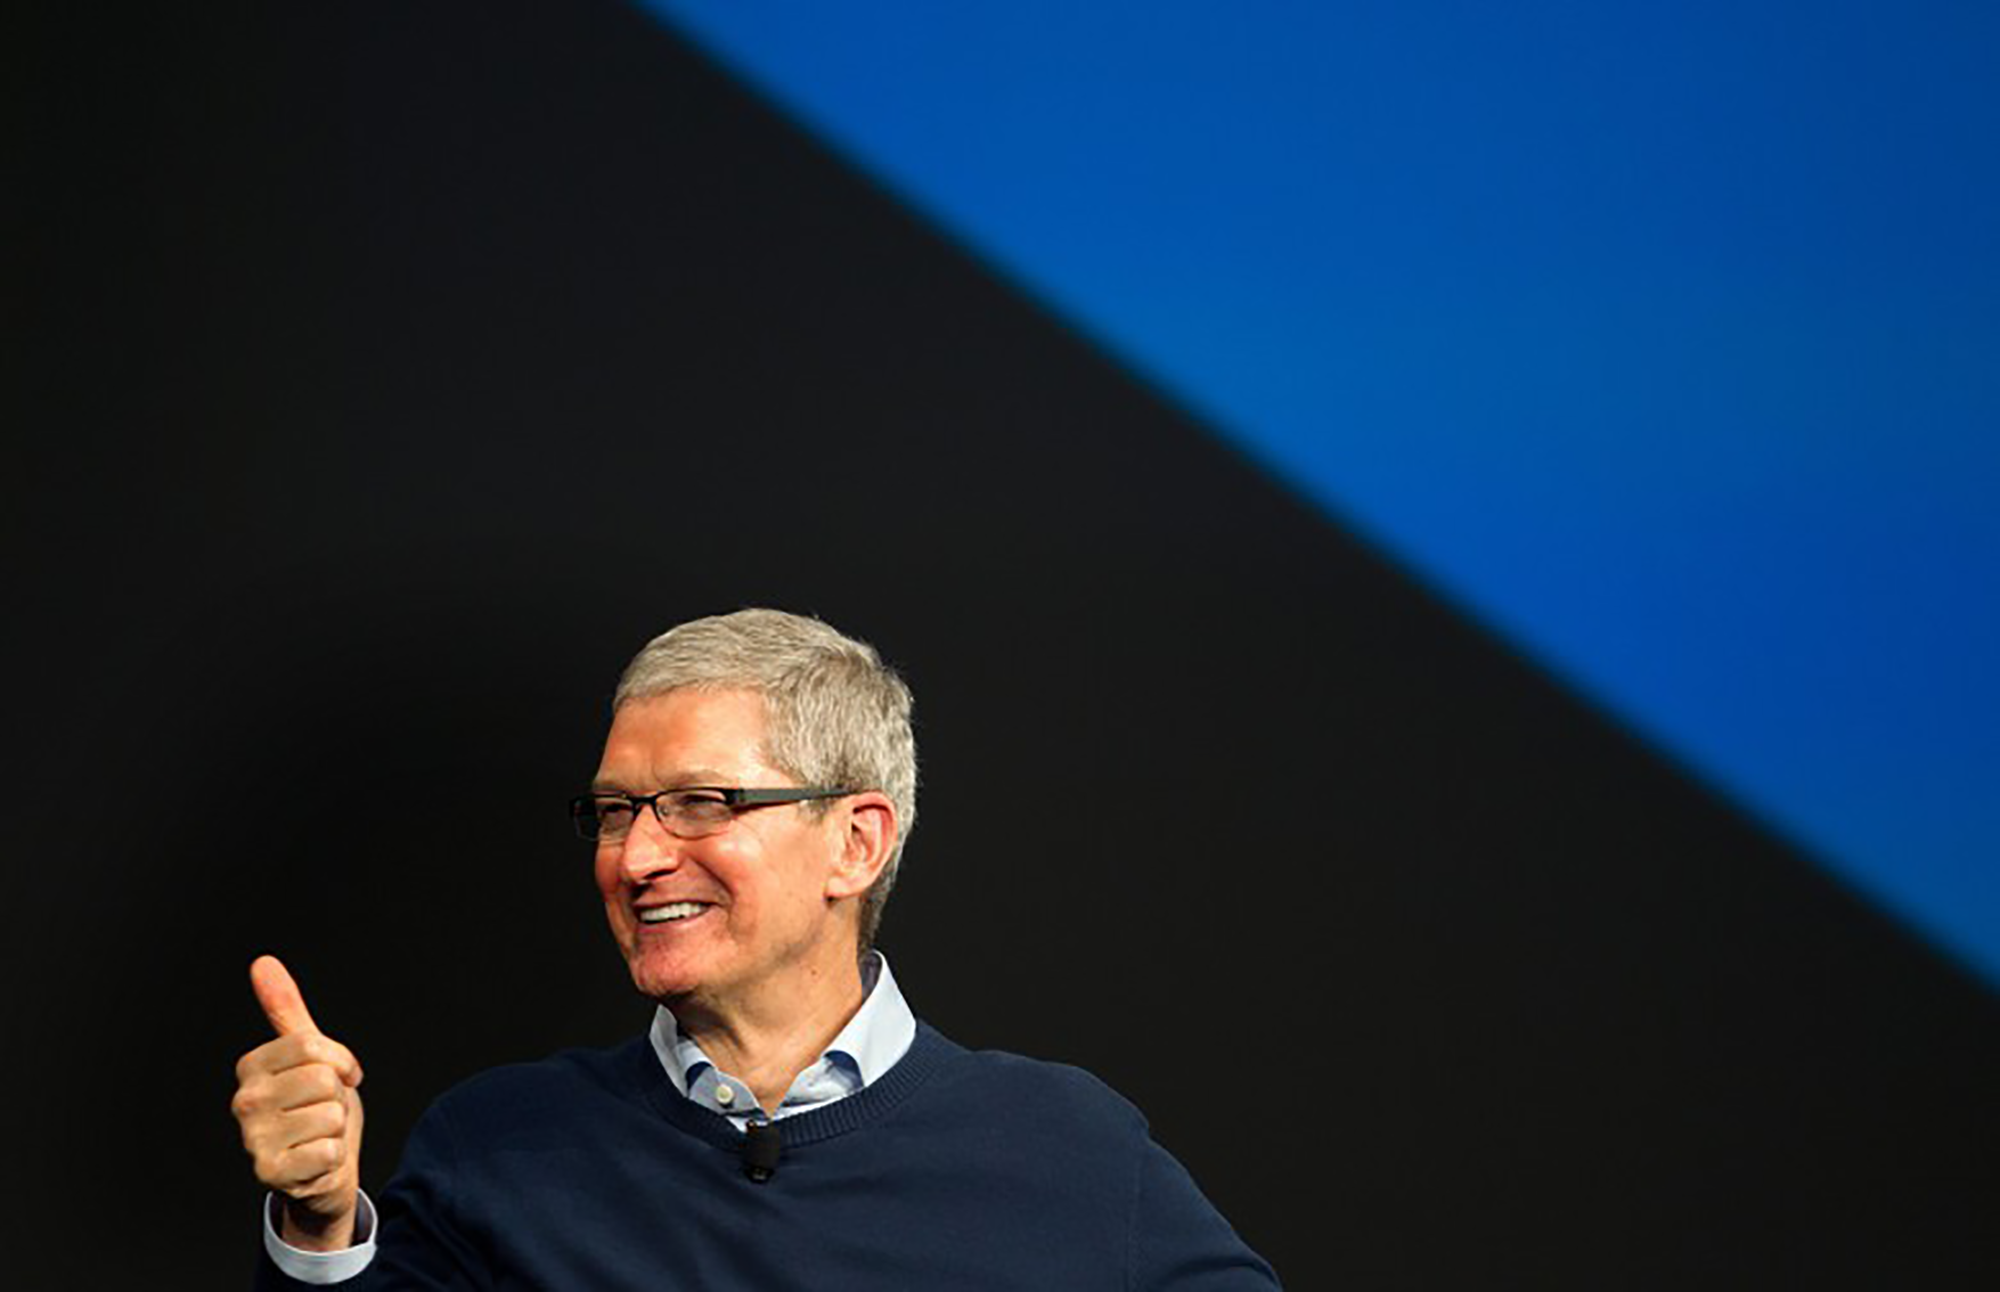 Tim Cook is Nike’s new Lead Independent Director